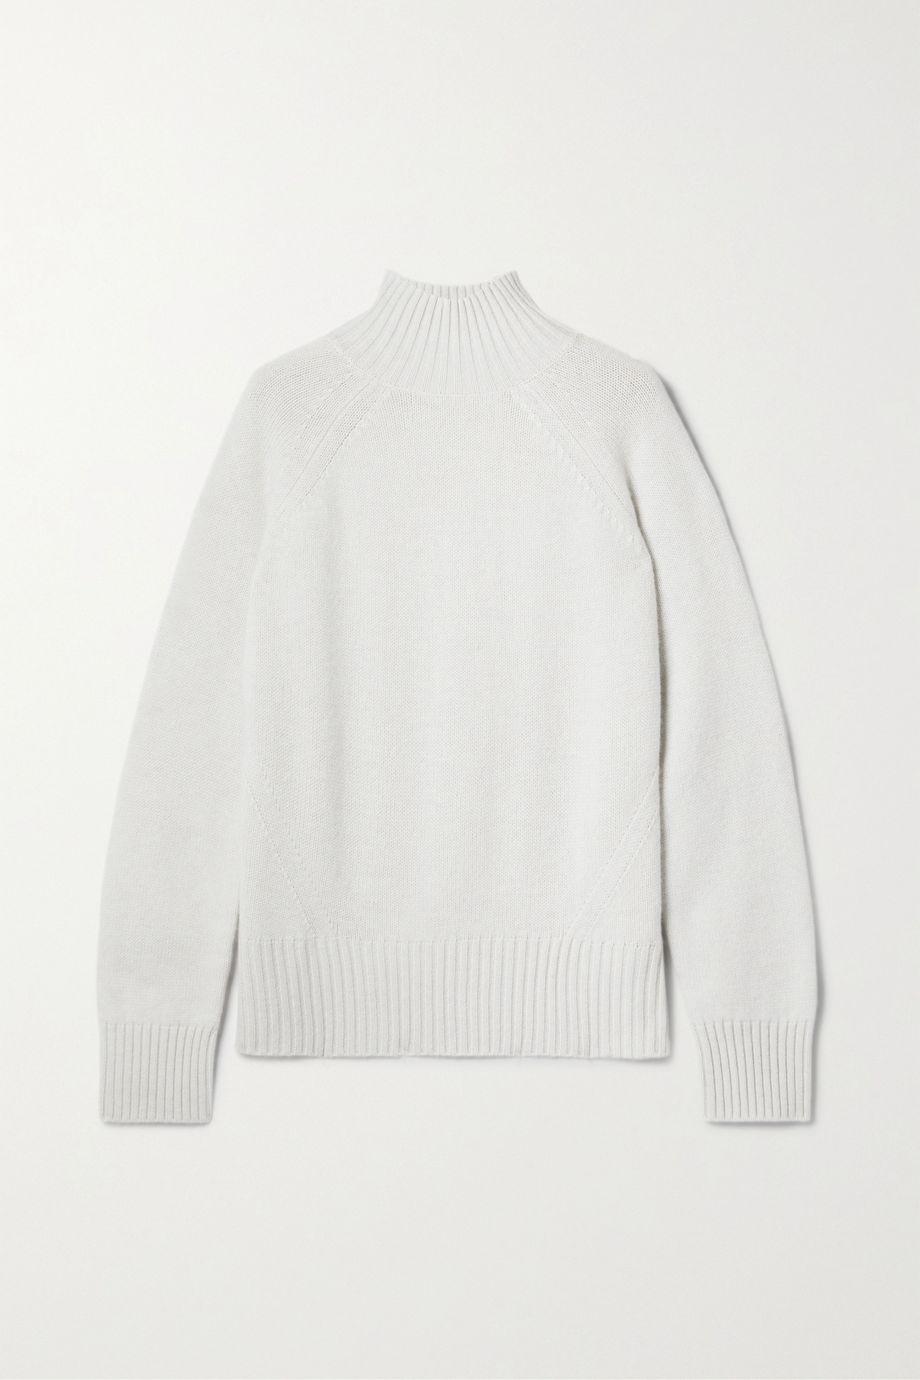 Wool and cashmere-blend sweater by ALLUDE